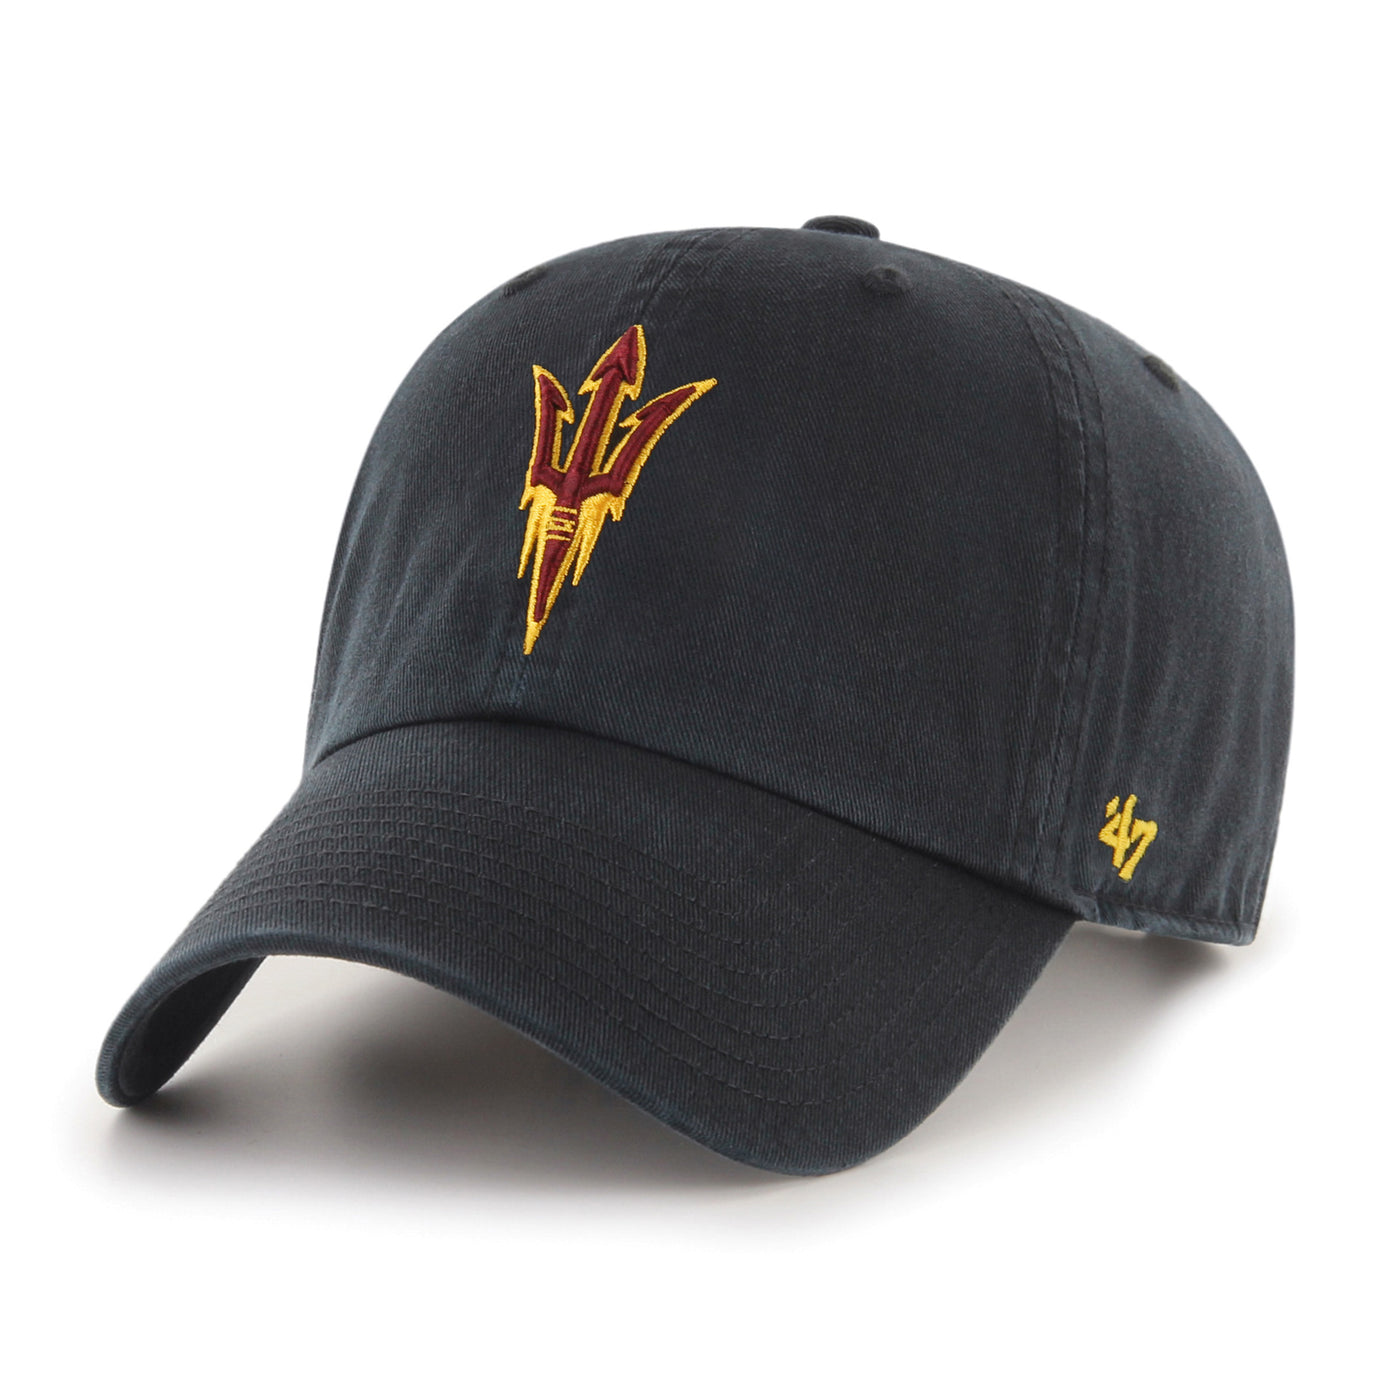 ASU black adjustable hat with embroidered pitchfork in maroon and gold